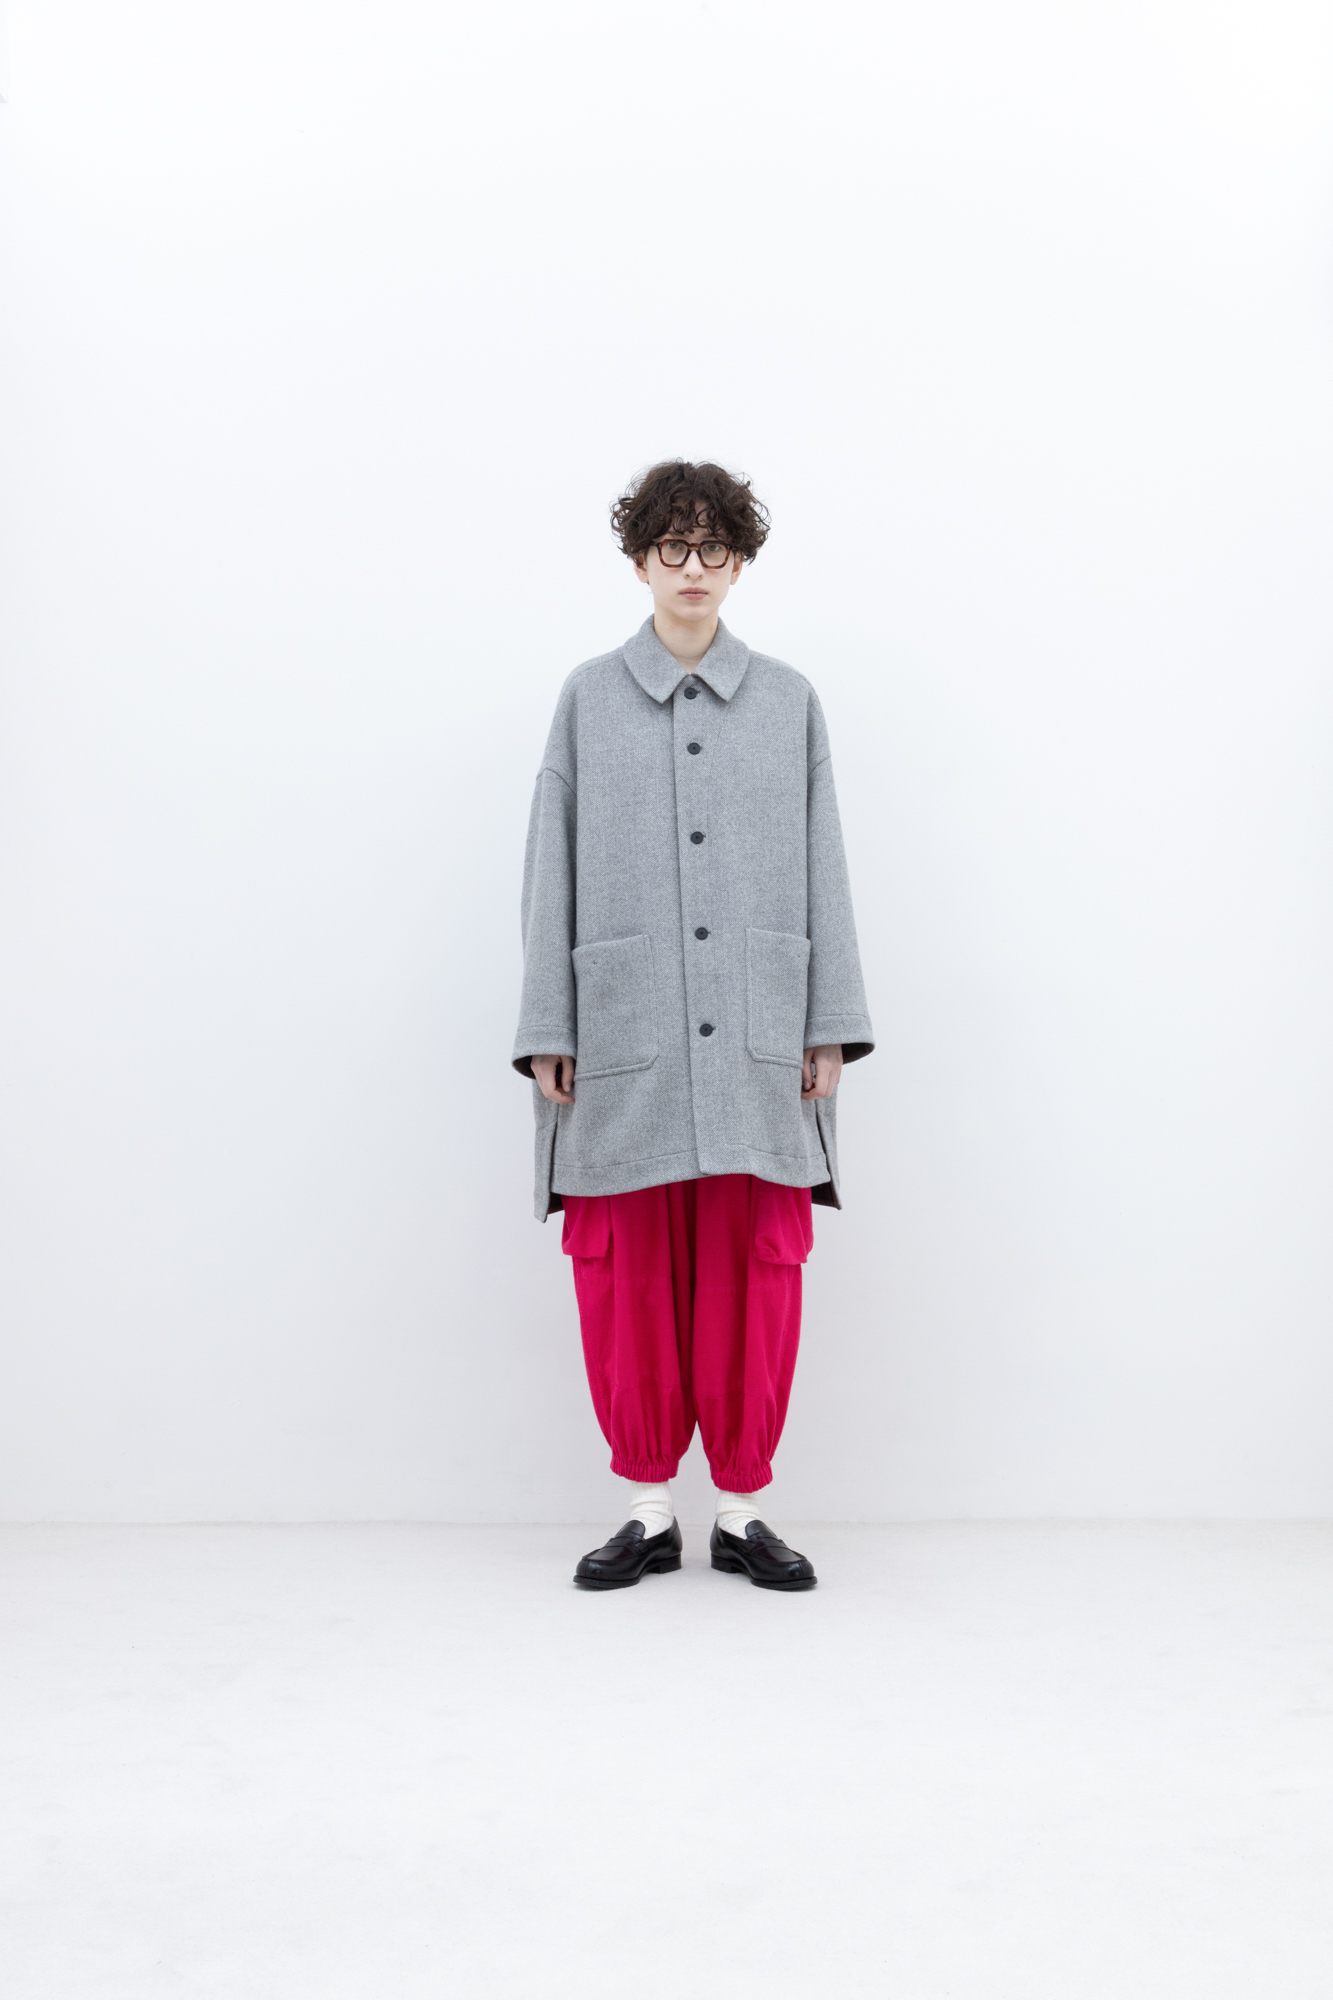 No. 047 | 2022 AW WOMENS / Model H=169cm | LOOK | FIRMUM